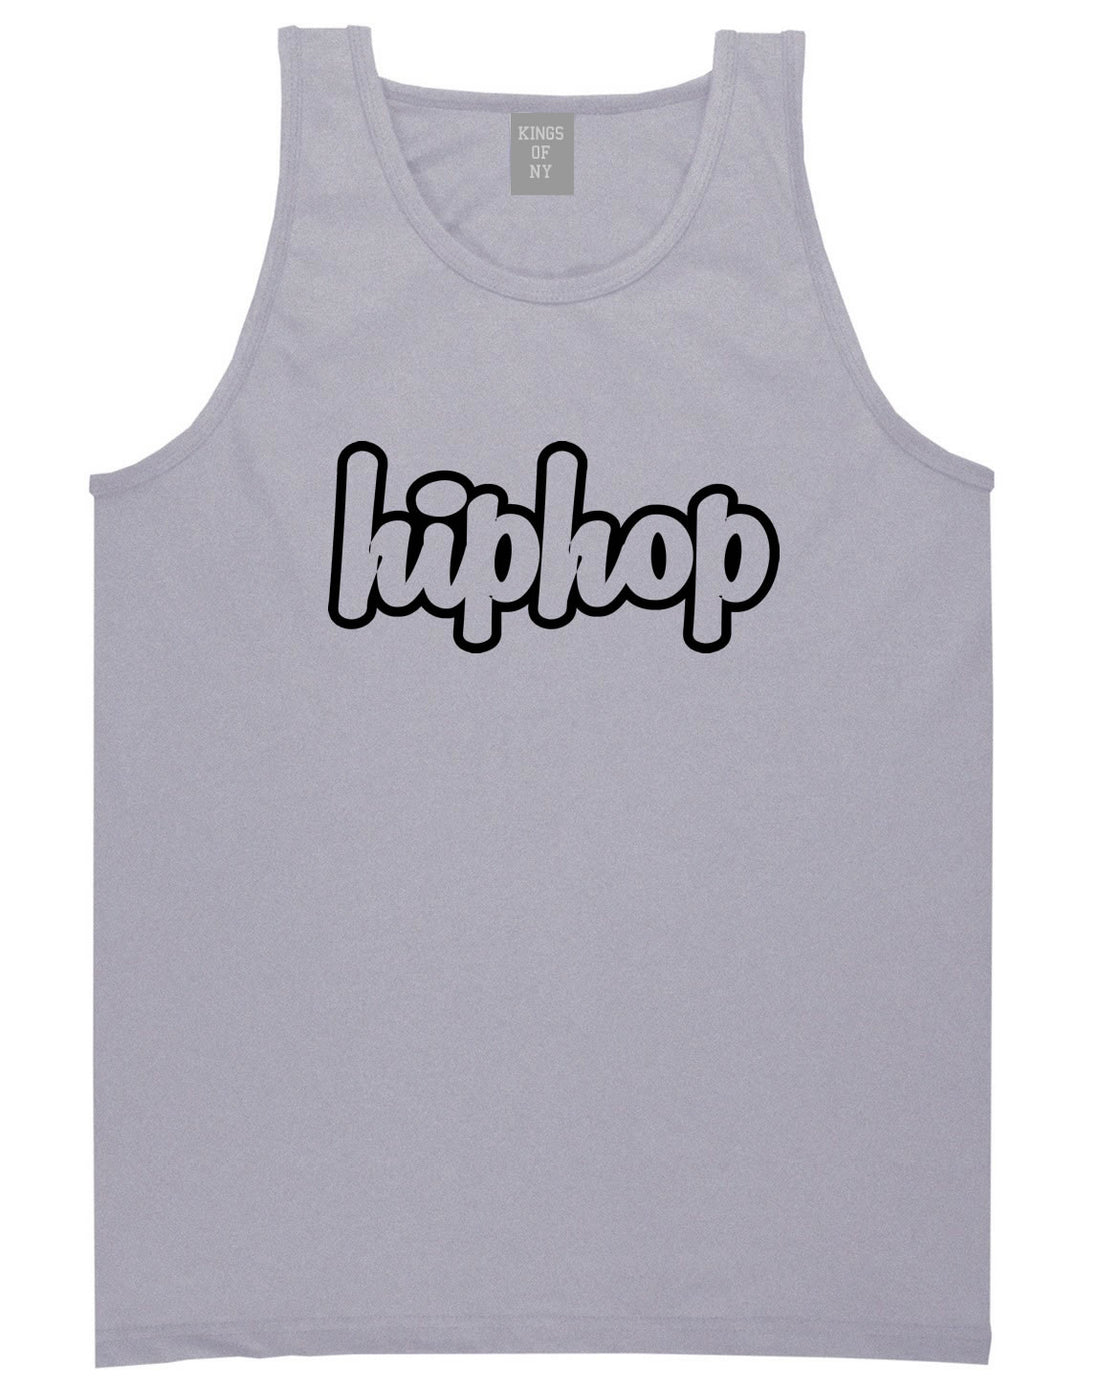 Hiphop Outline Old School Tank Top in Grey By Kings Of NY